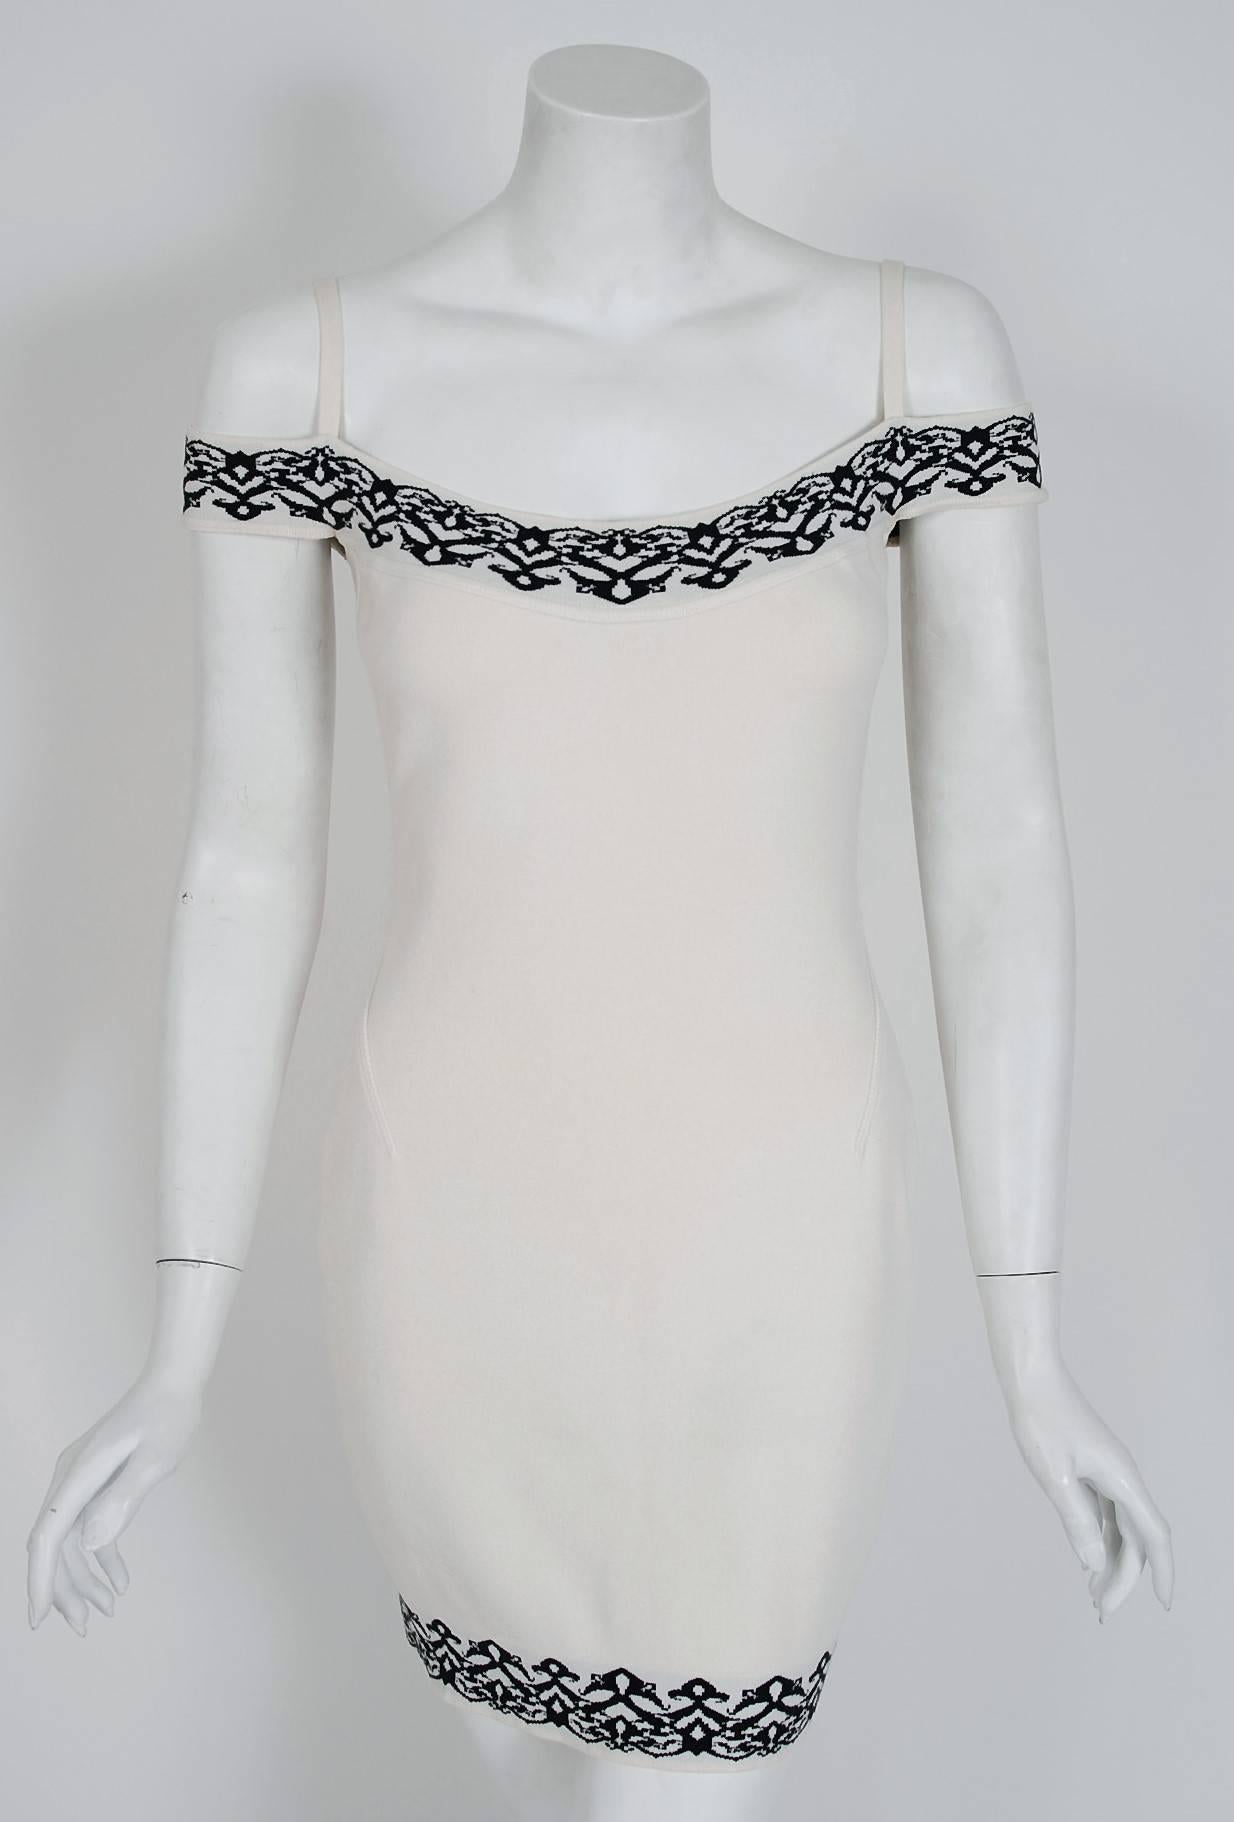 Iconic black and white patterned knit dress from Azzedine Alaia's 1992 Spring collection. In the 1980's when most of the fashion world was embracing sharp shouldered power dressing and baggy androgyny, Alaïa introduced the world to the 'body' and